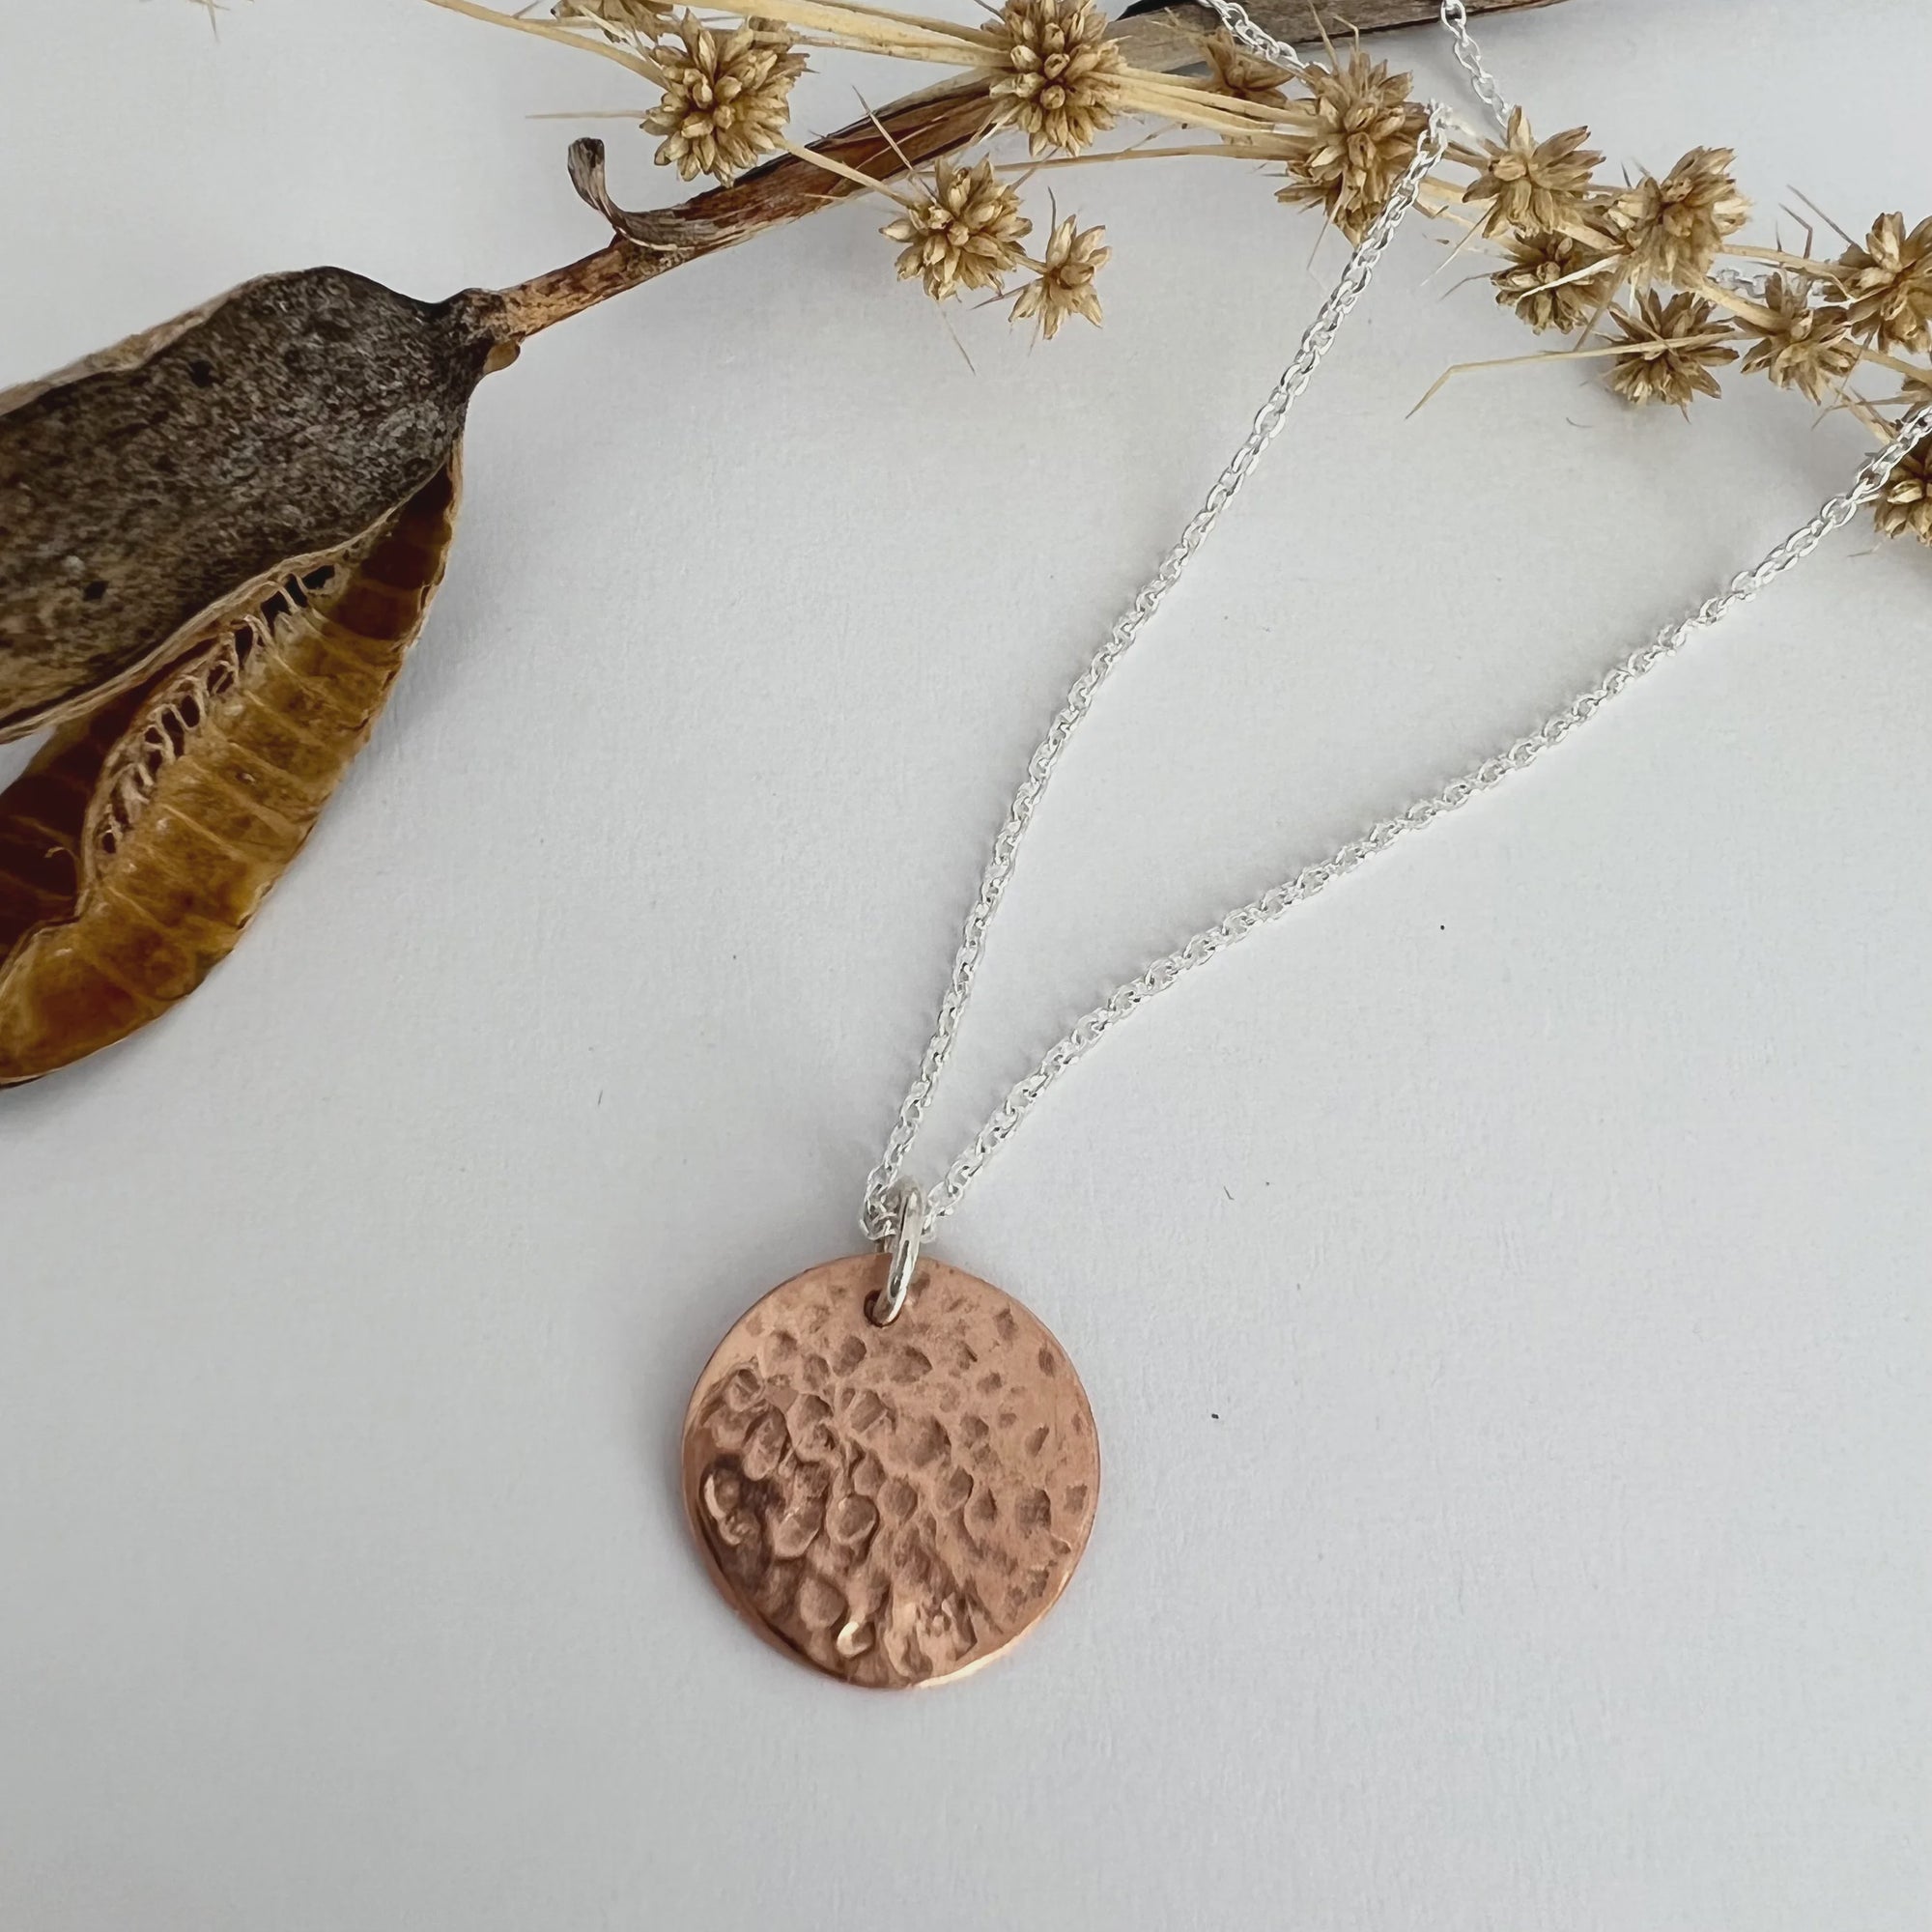 Full Moon Necklace - Copper